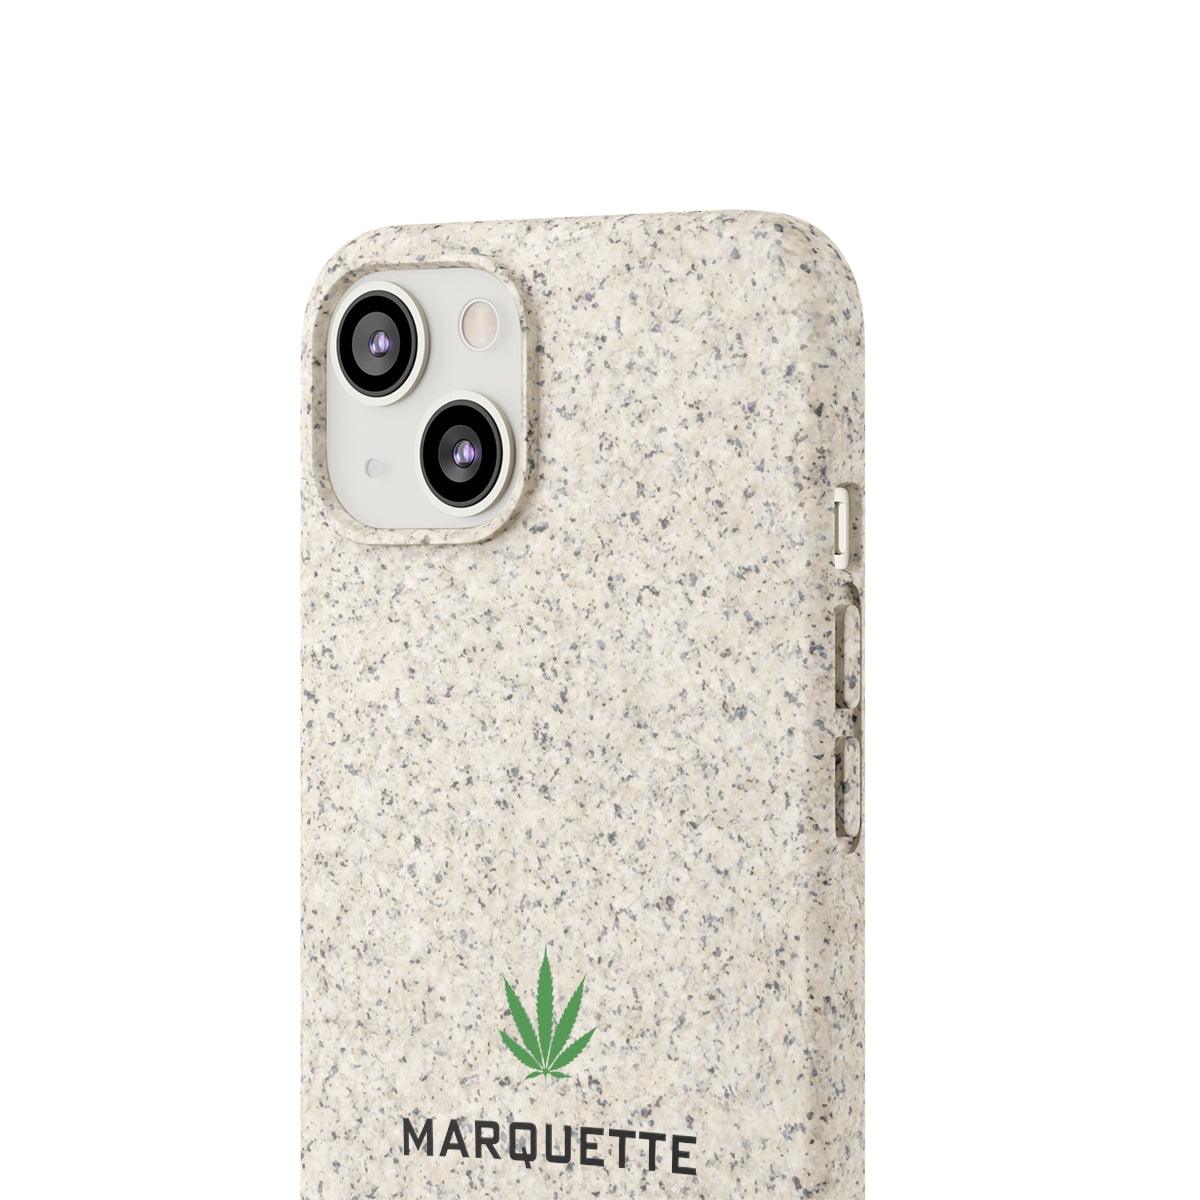 'Marquette' Phone Cases (w/ Cannabis Leaf) | Android & iPhone - Circumspice Michigan